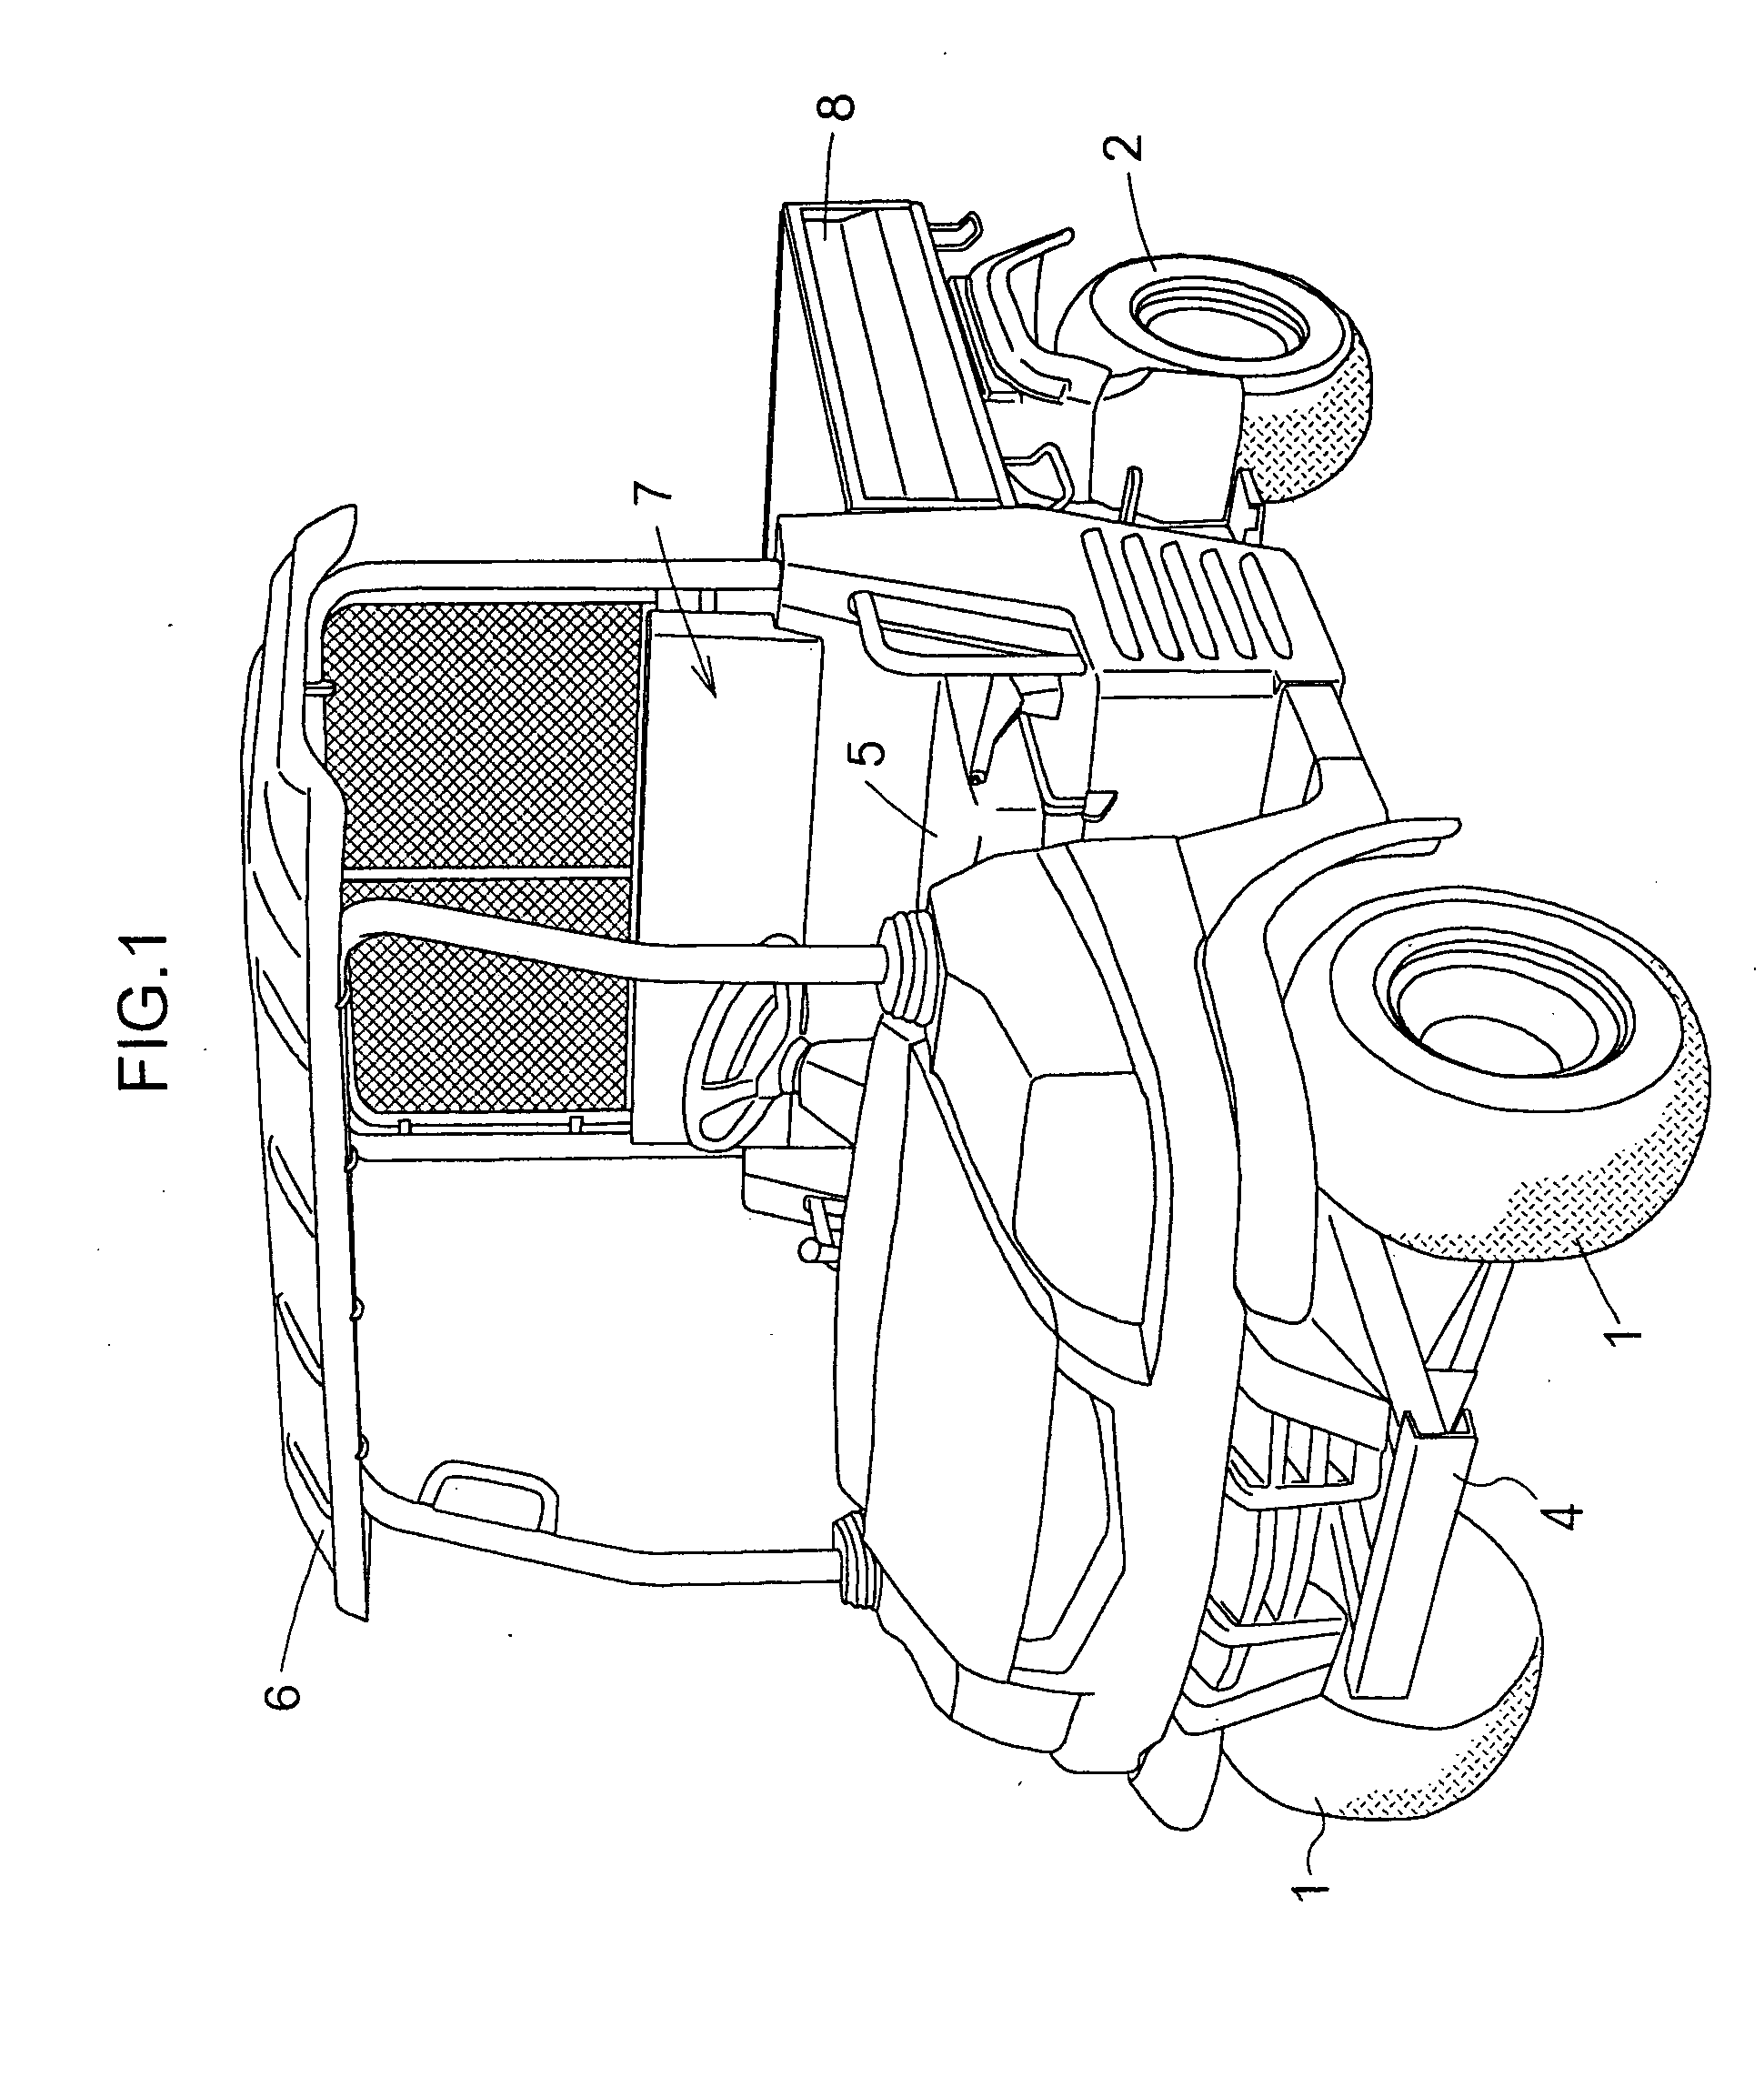 Change-speed control system for utility vehicle having stepless change-speed apparatus for speed-changing engine output and transmitting the speed-changed output to traveling unit